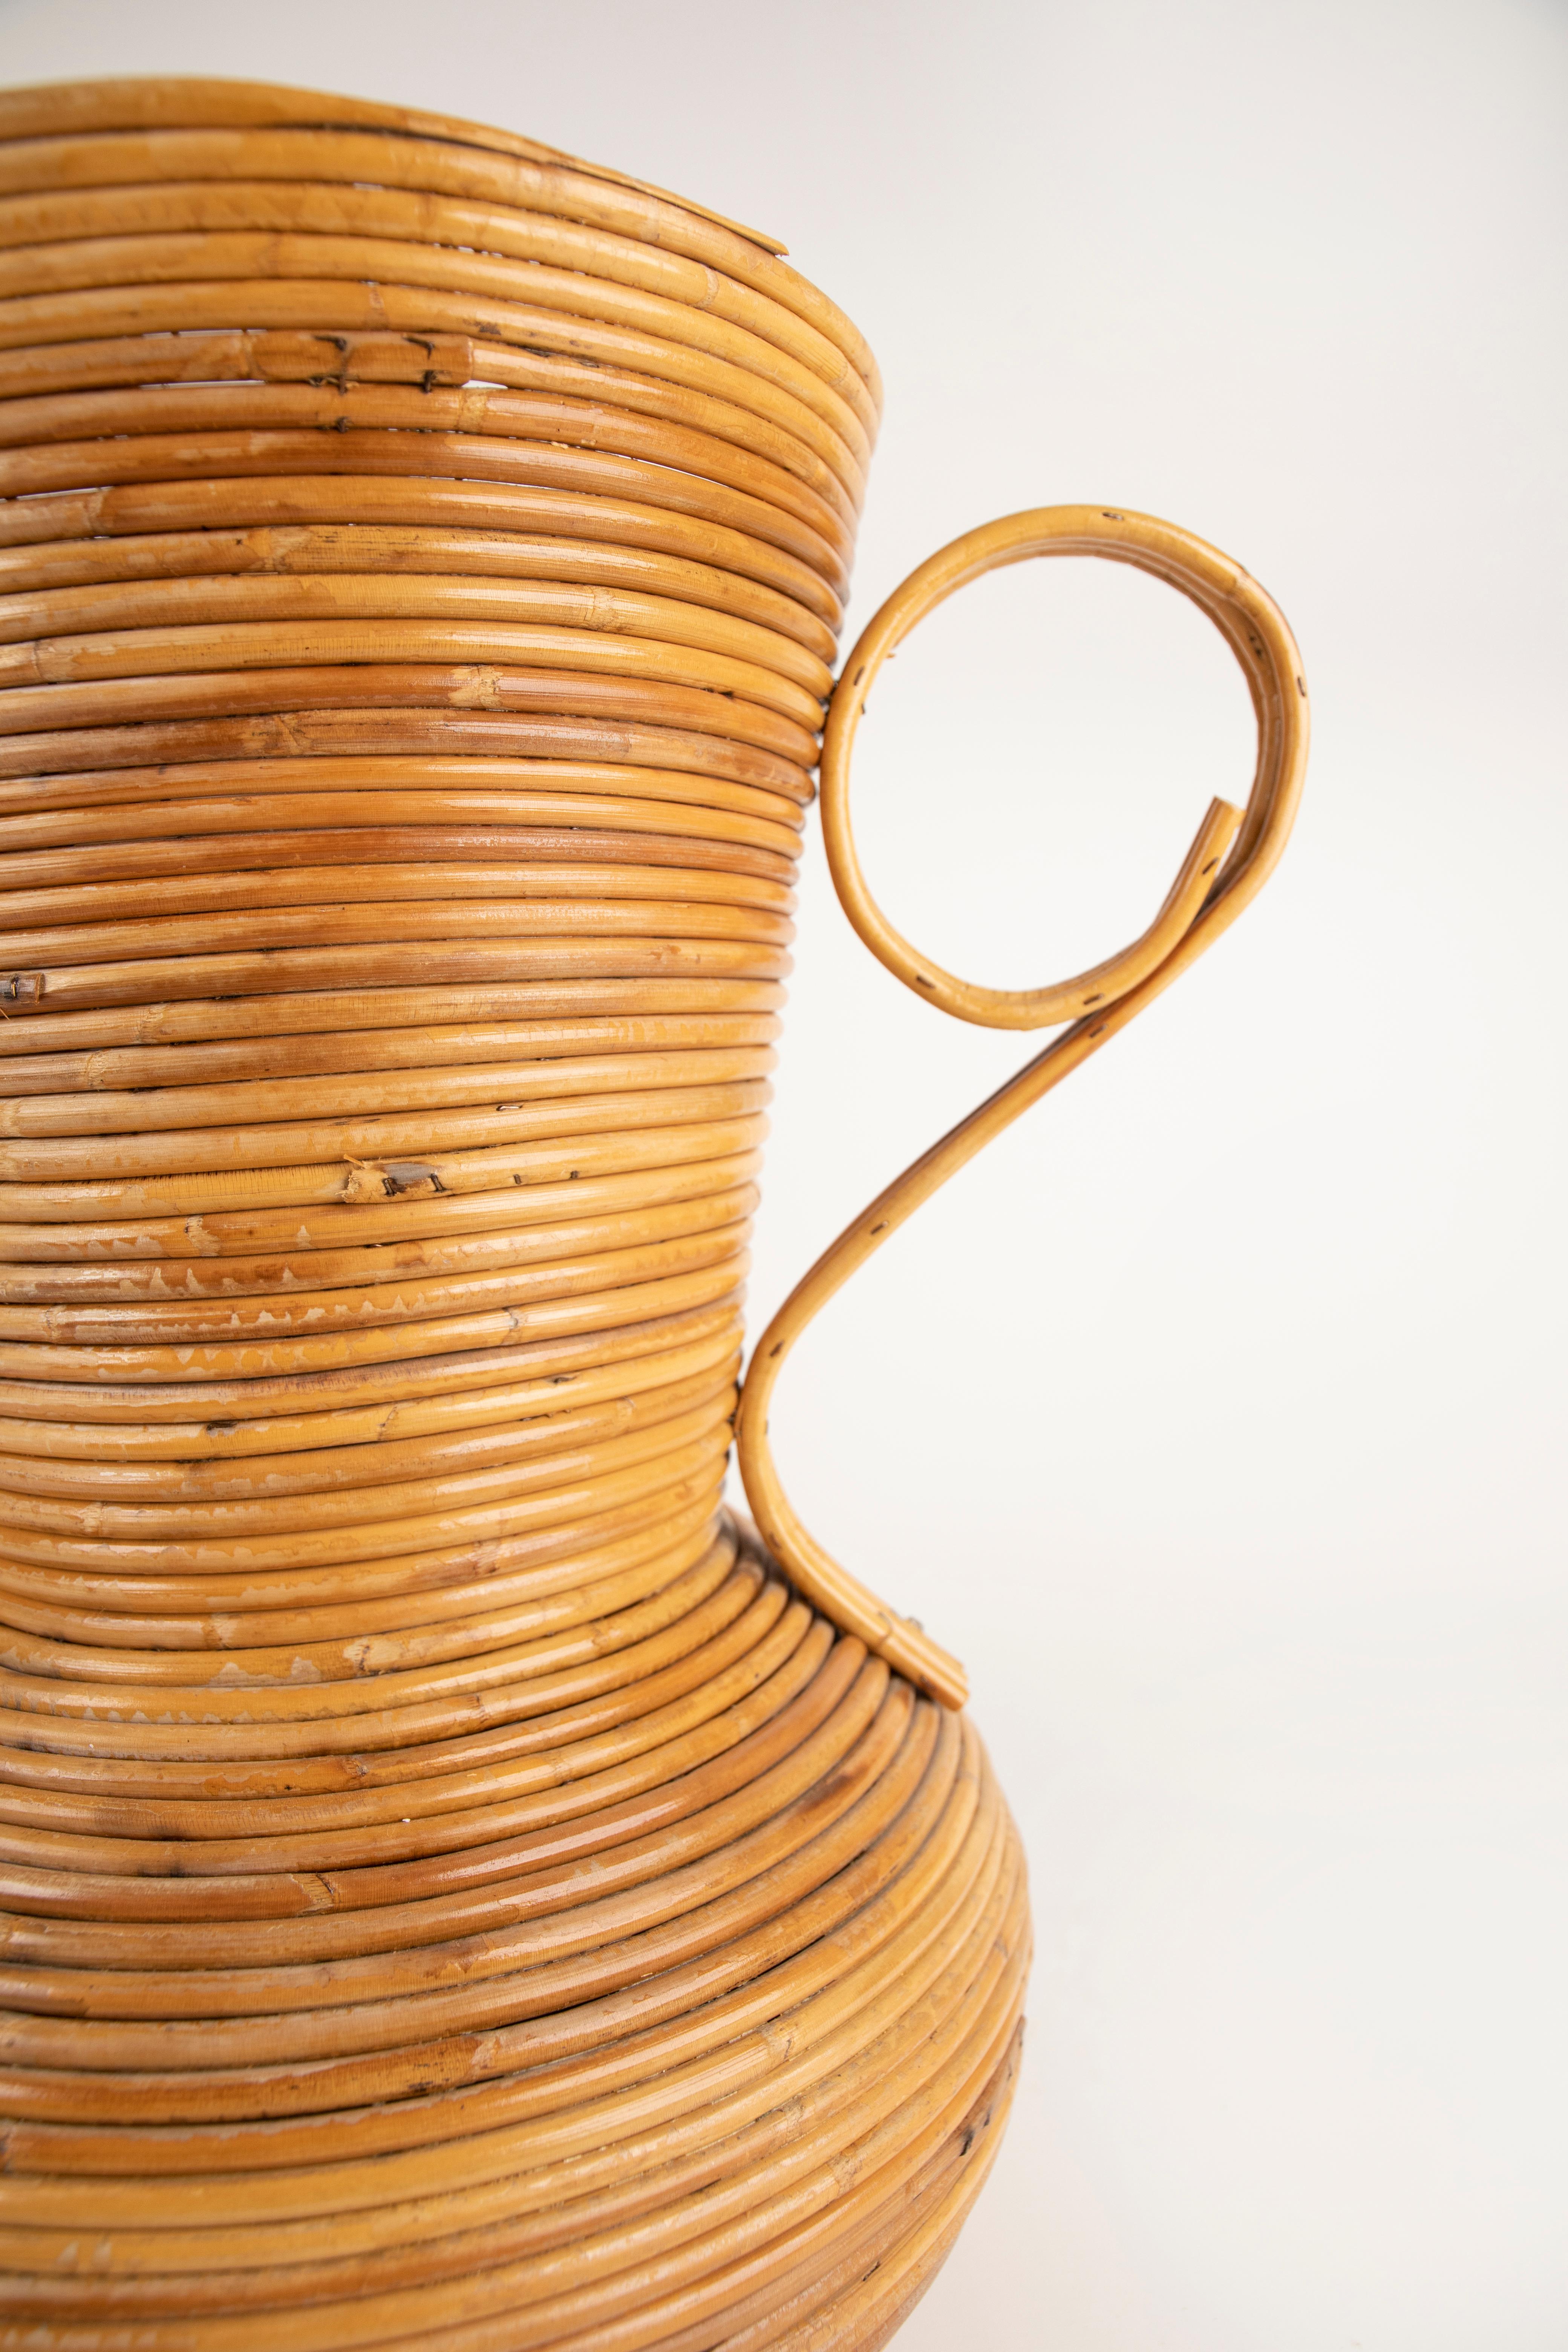 Pair of Rattan Amphoras Vases by Vivai del Sud, Italy 1960s For Sale 5